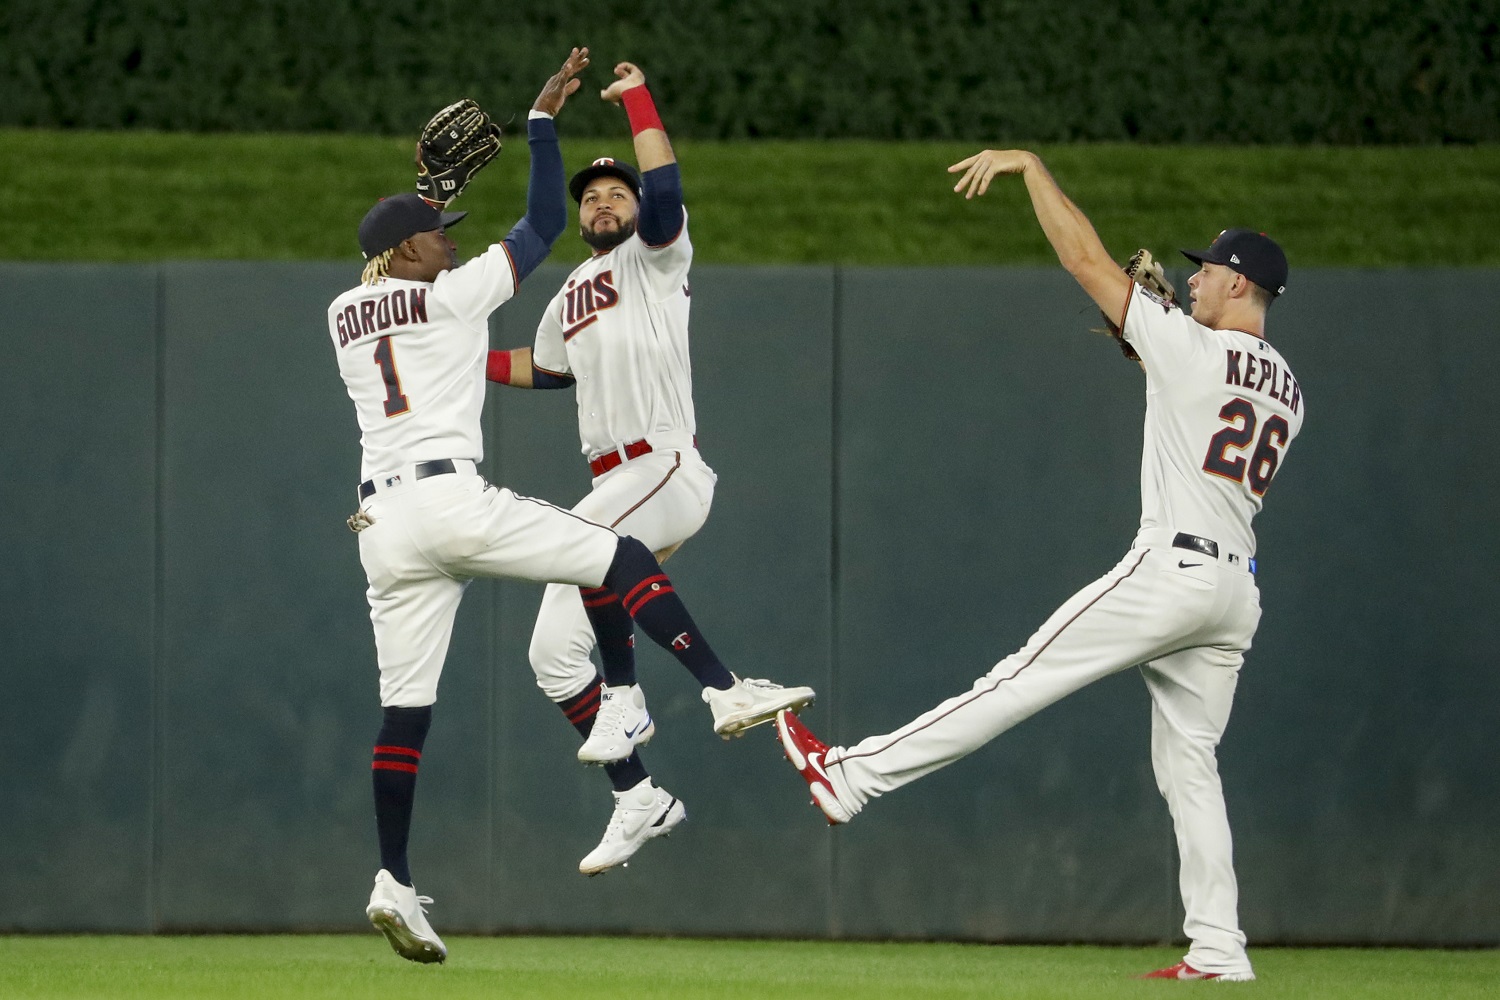 Heading into spring training, Twins have an outfield opening for